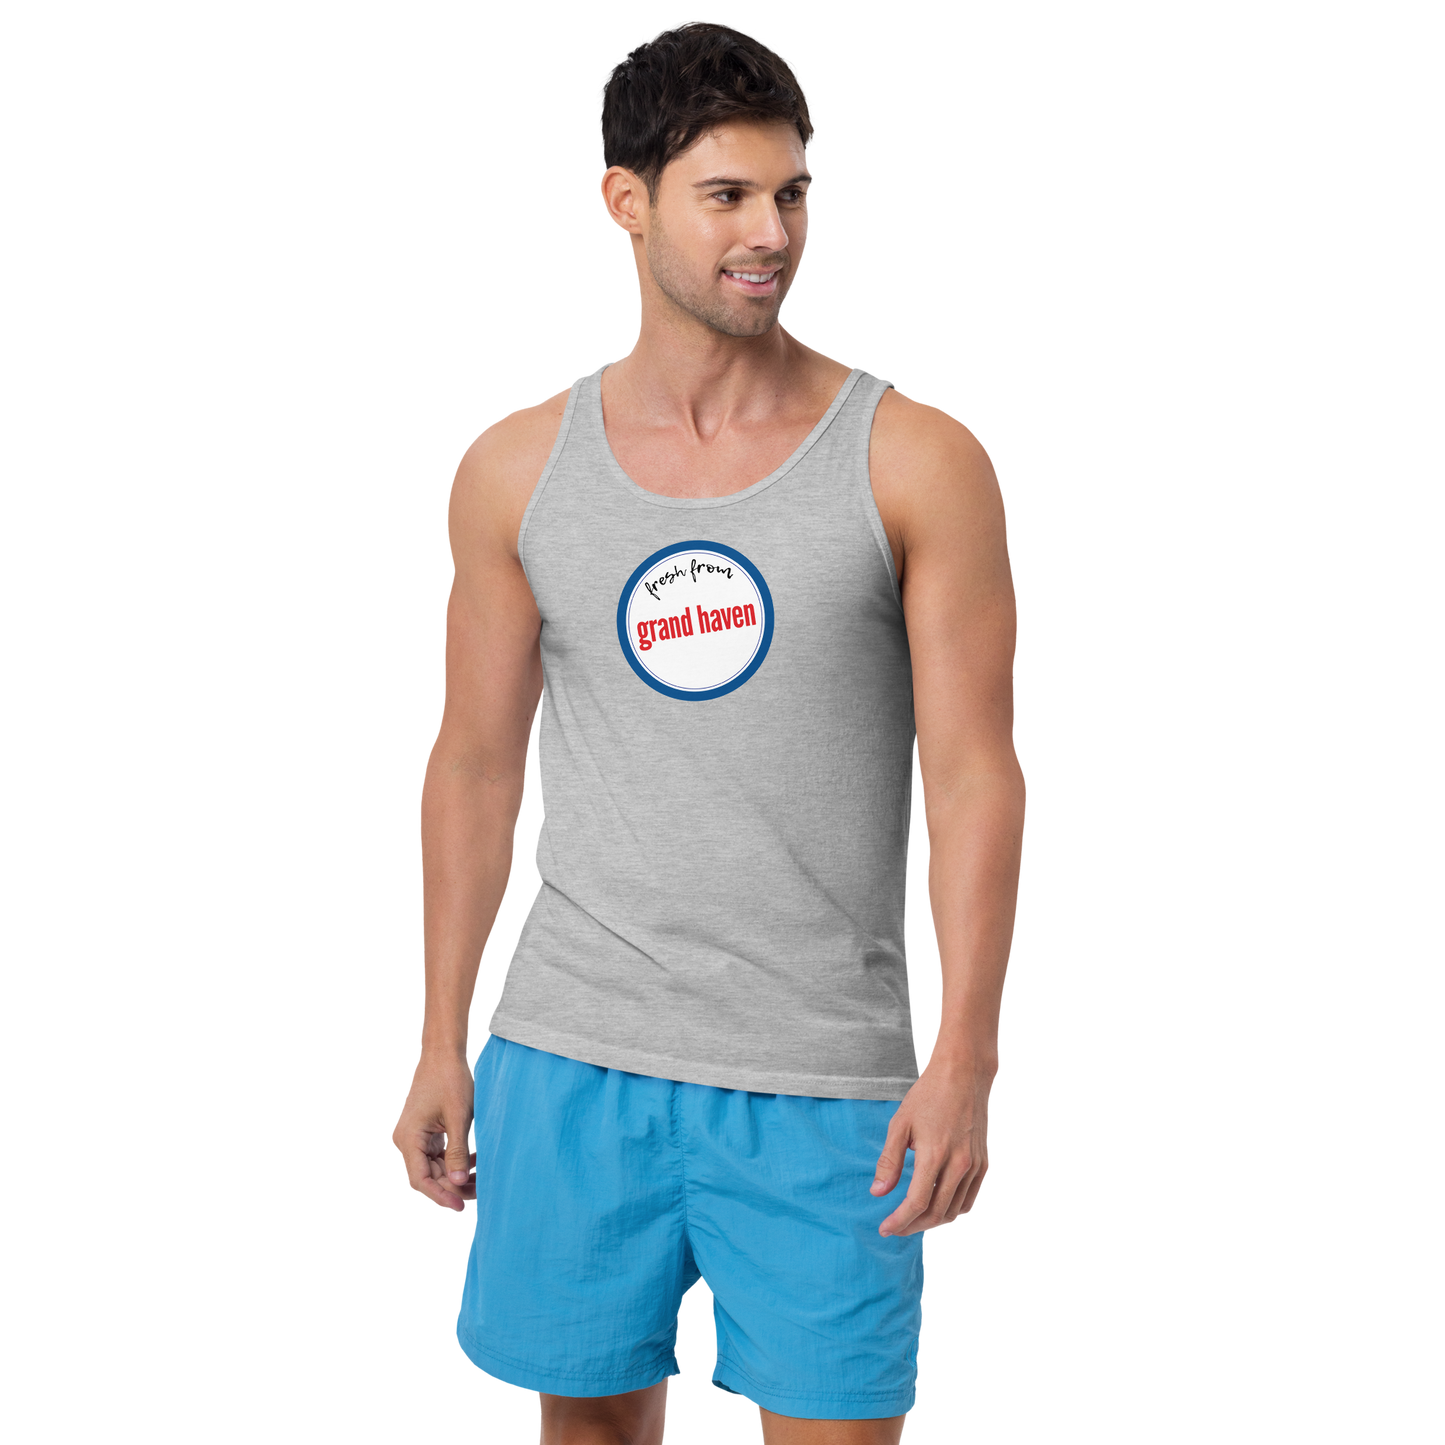 'Fresh From Grand Haven' Tank Top | Unisex Jersey